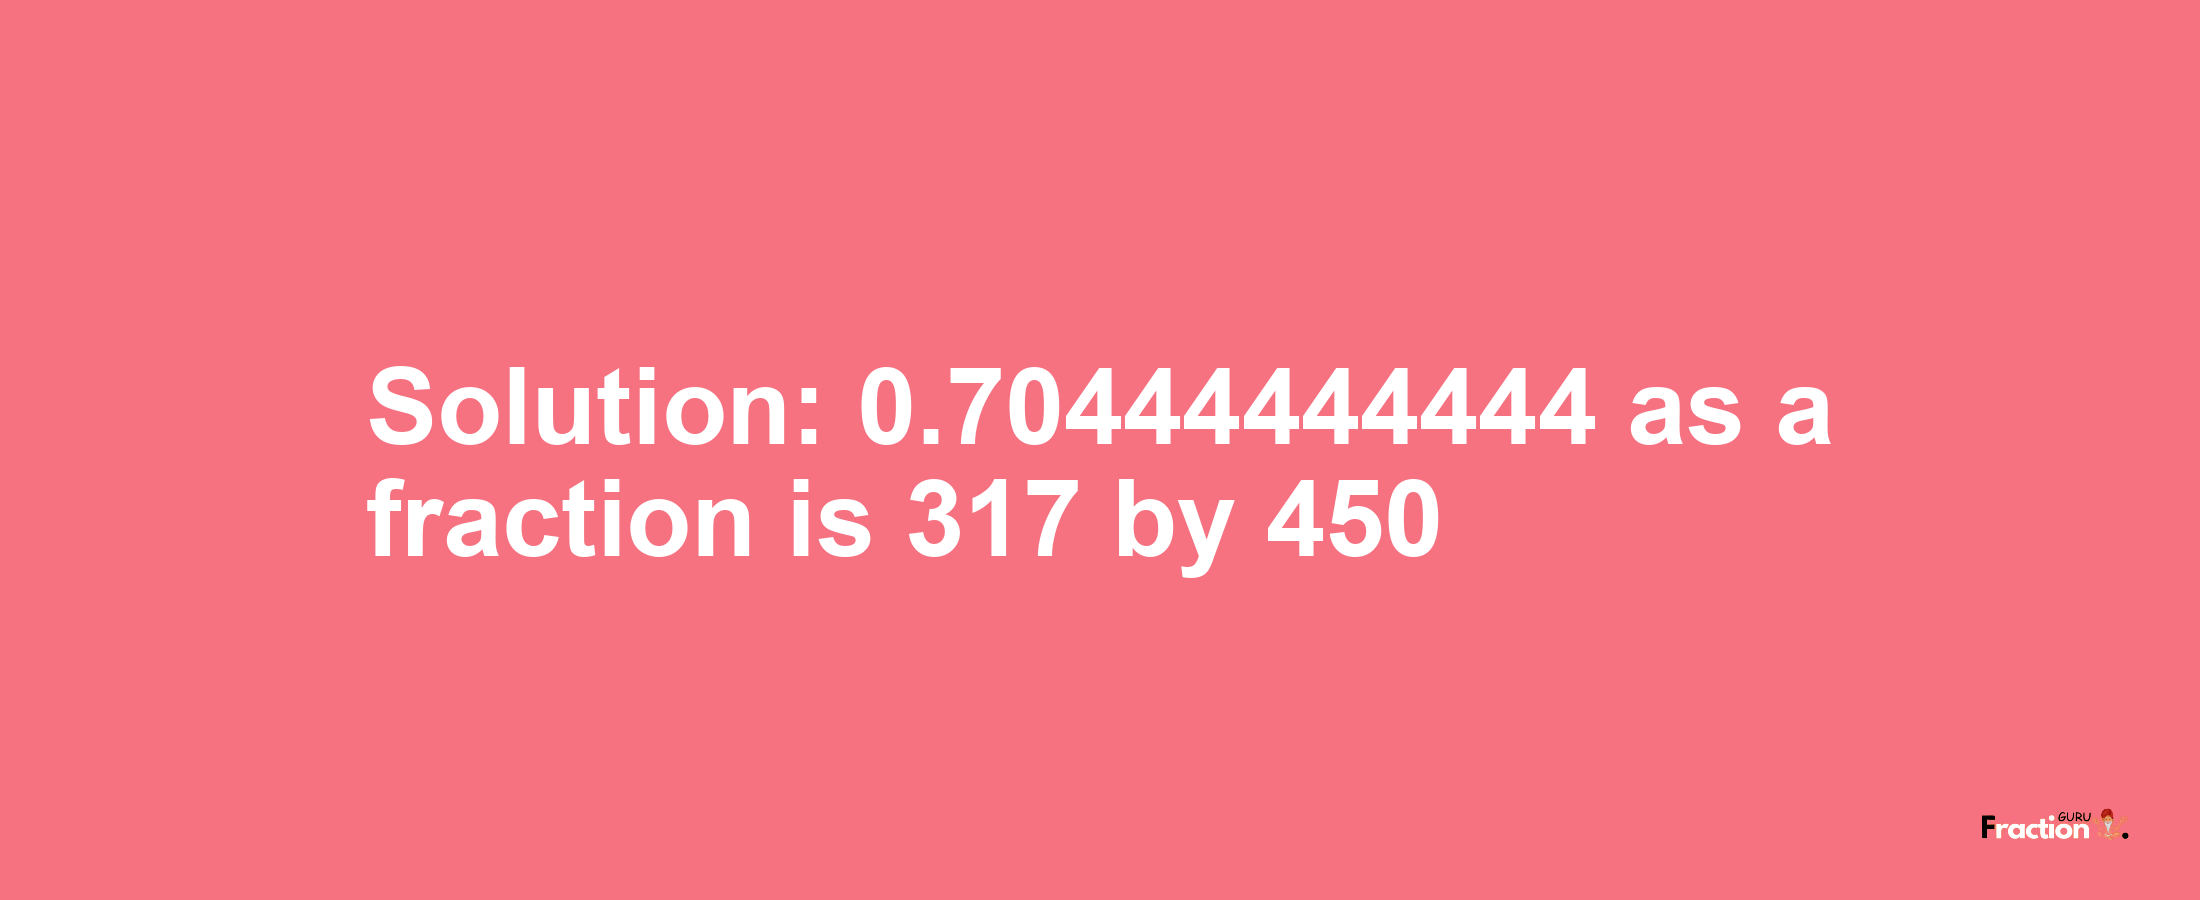 Solution:0.70444444444 as a fraction is 317/450